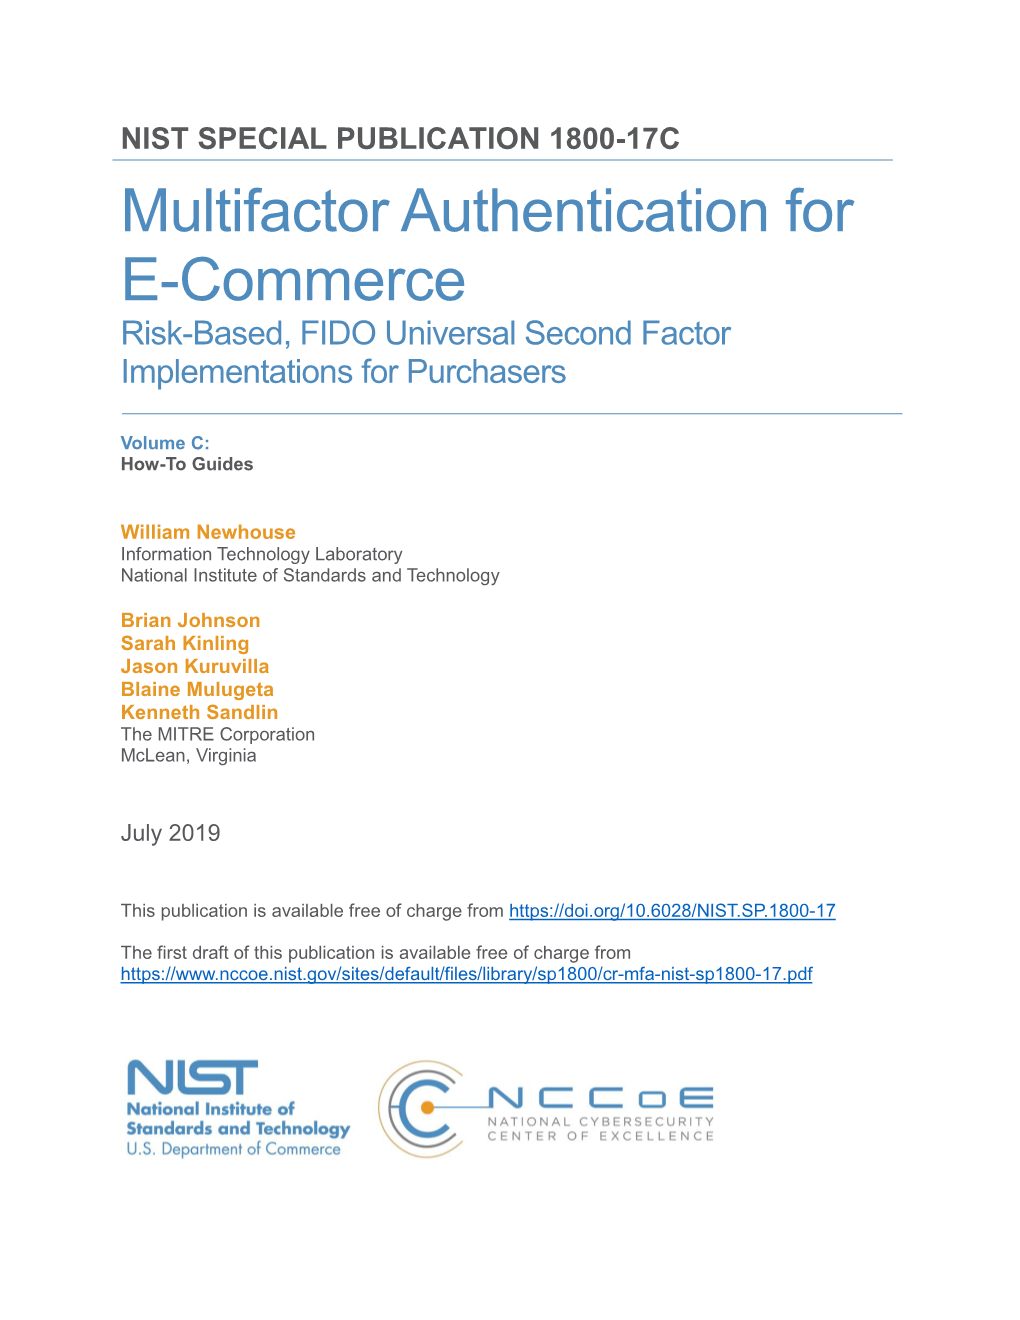 Multifactor Authentication for E-Commerce Risk-Based, FIDO Universal Second Factor Implementations for Purchasers